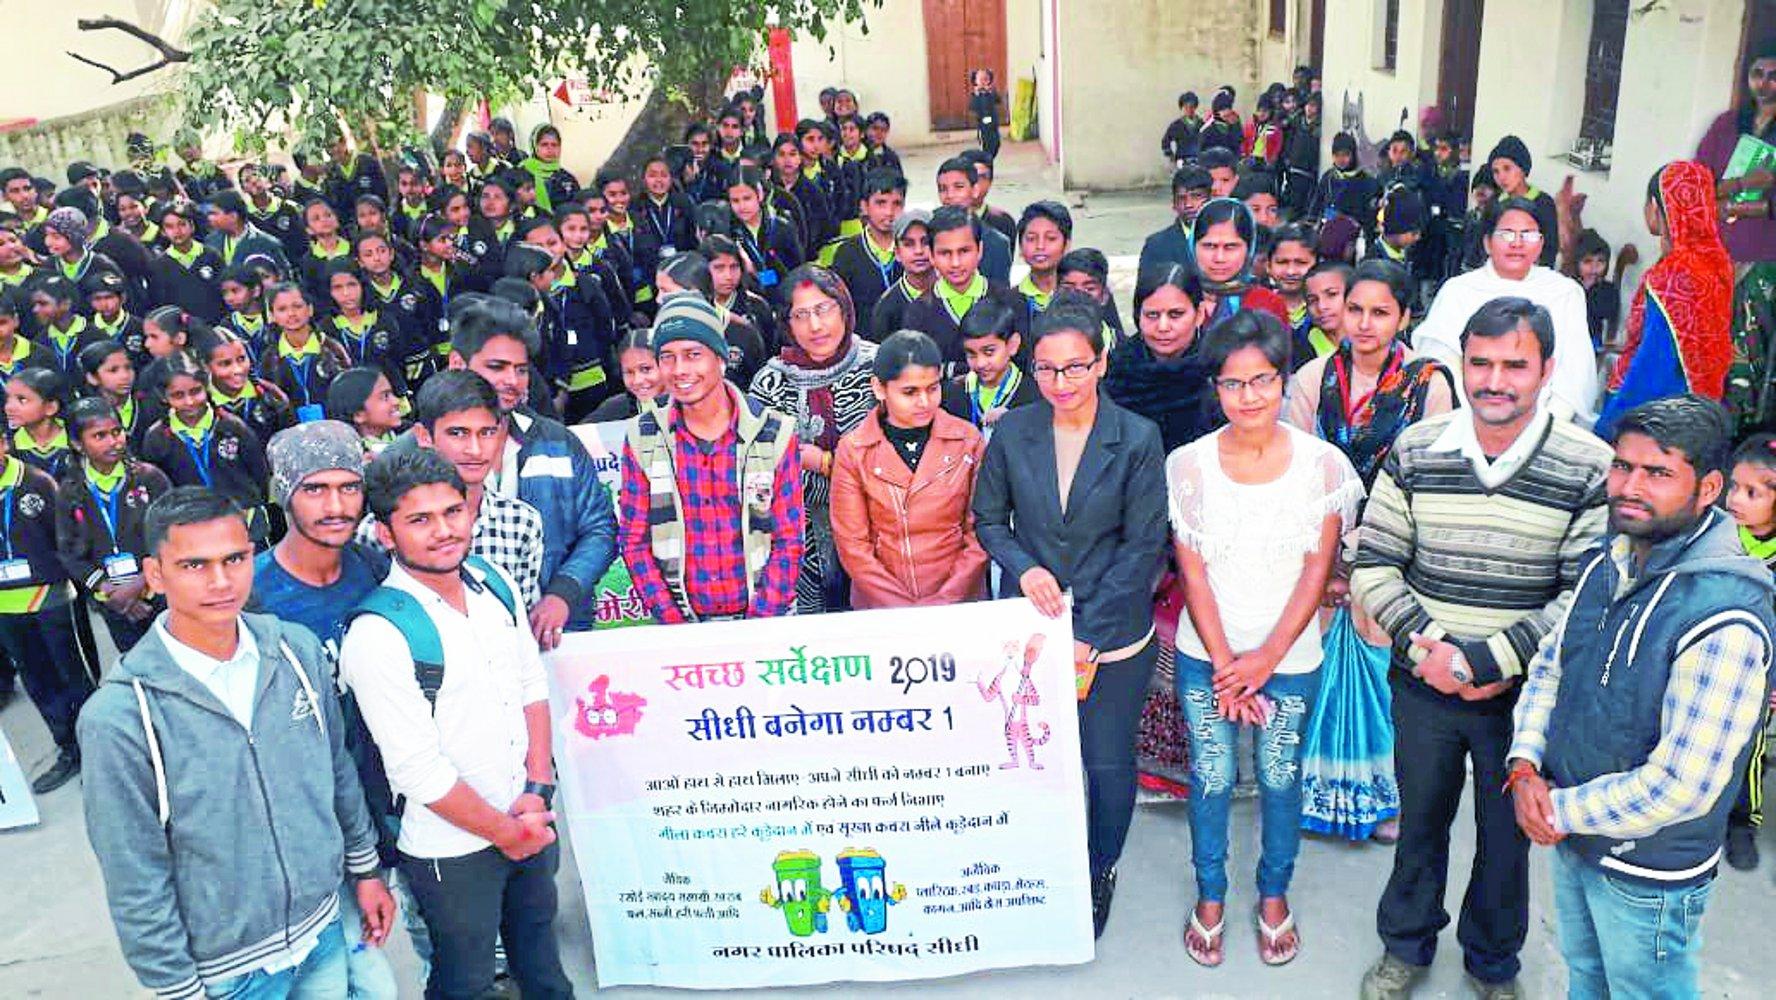 People's mass movement in cleanliness campaign